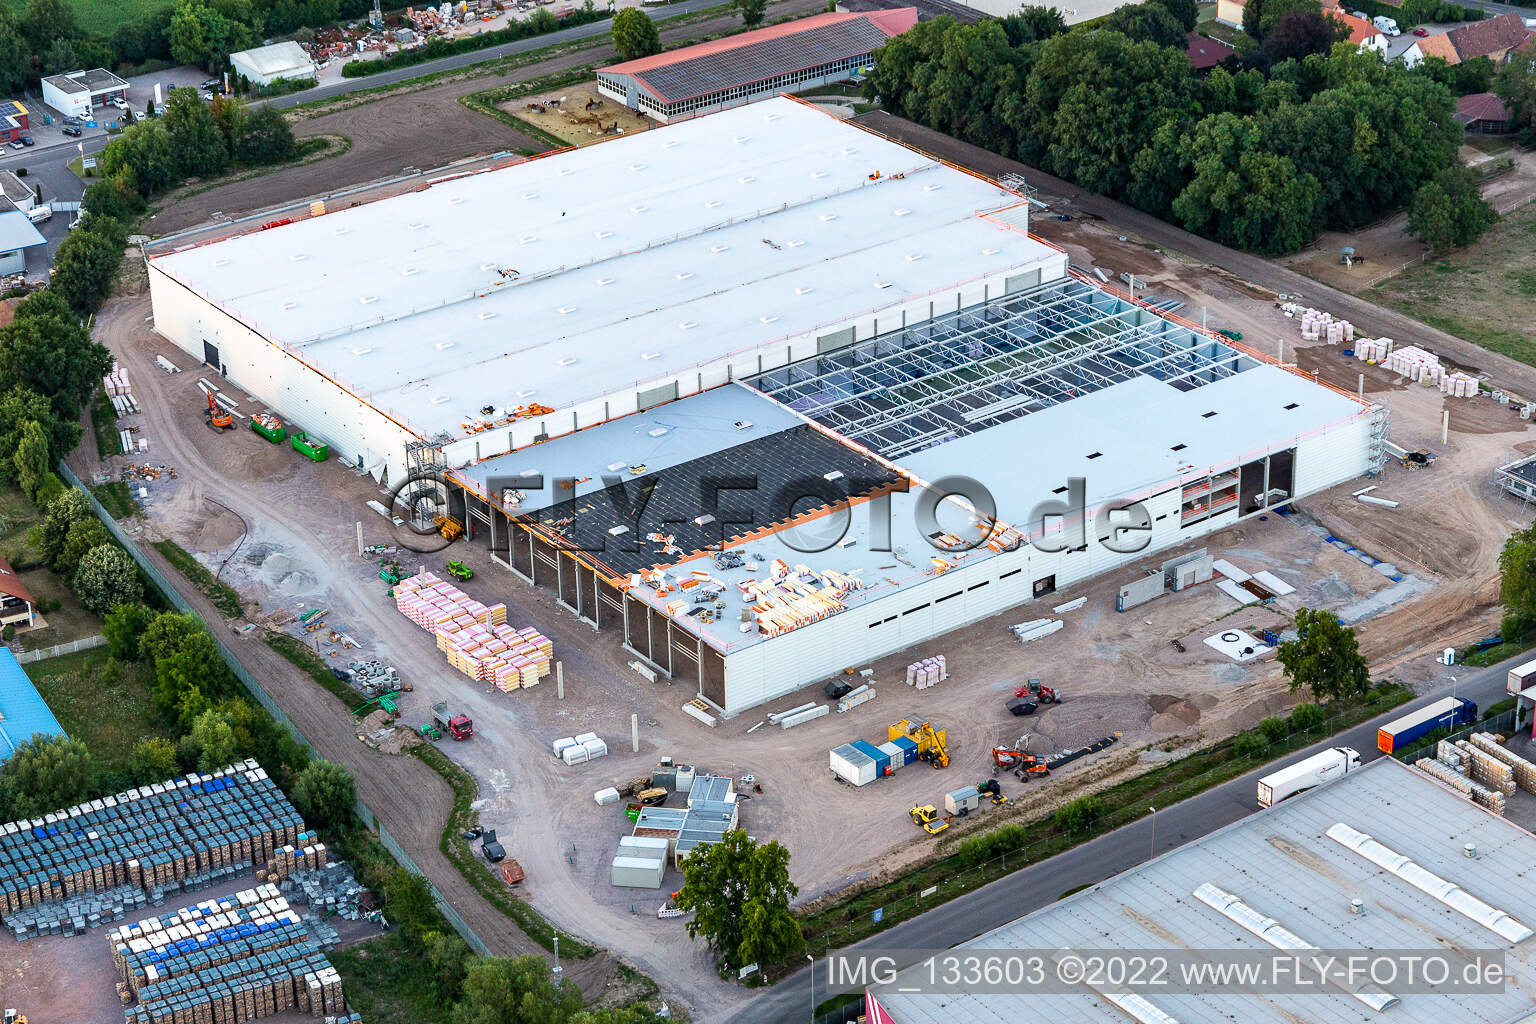 Oblique view of Expansion of the new Hornbach central warehouse building in Essingen in the state Rhineland-Palatinate, Germany